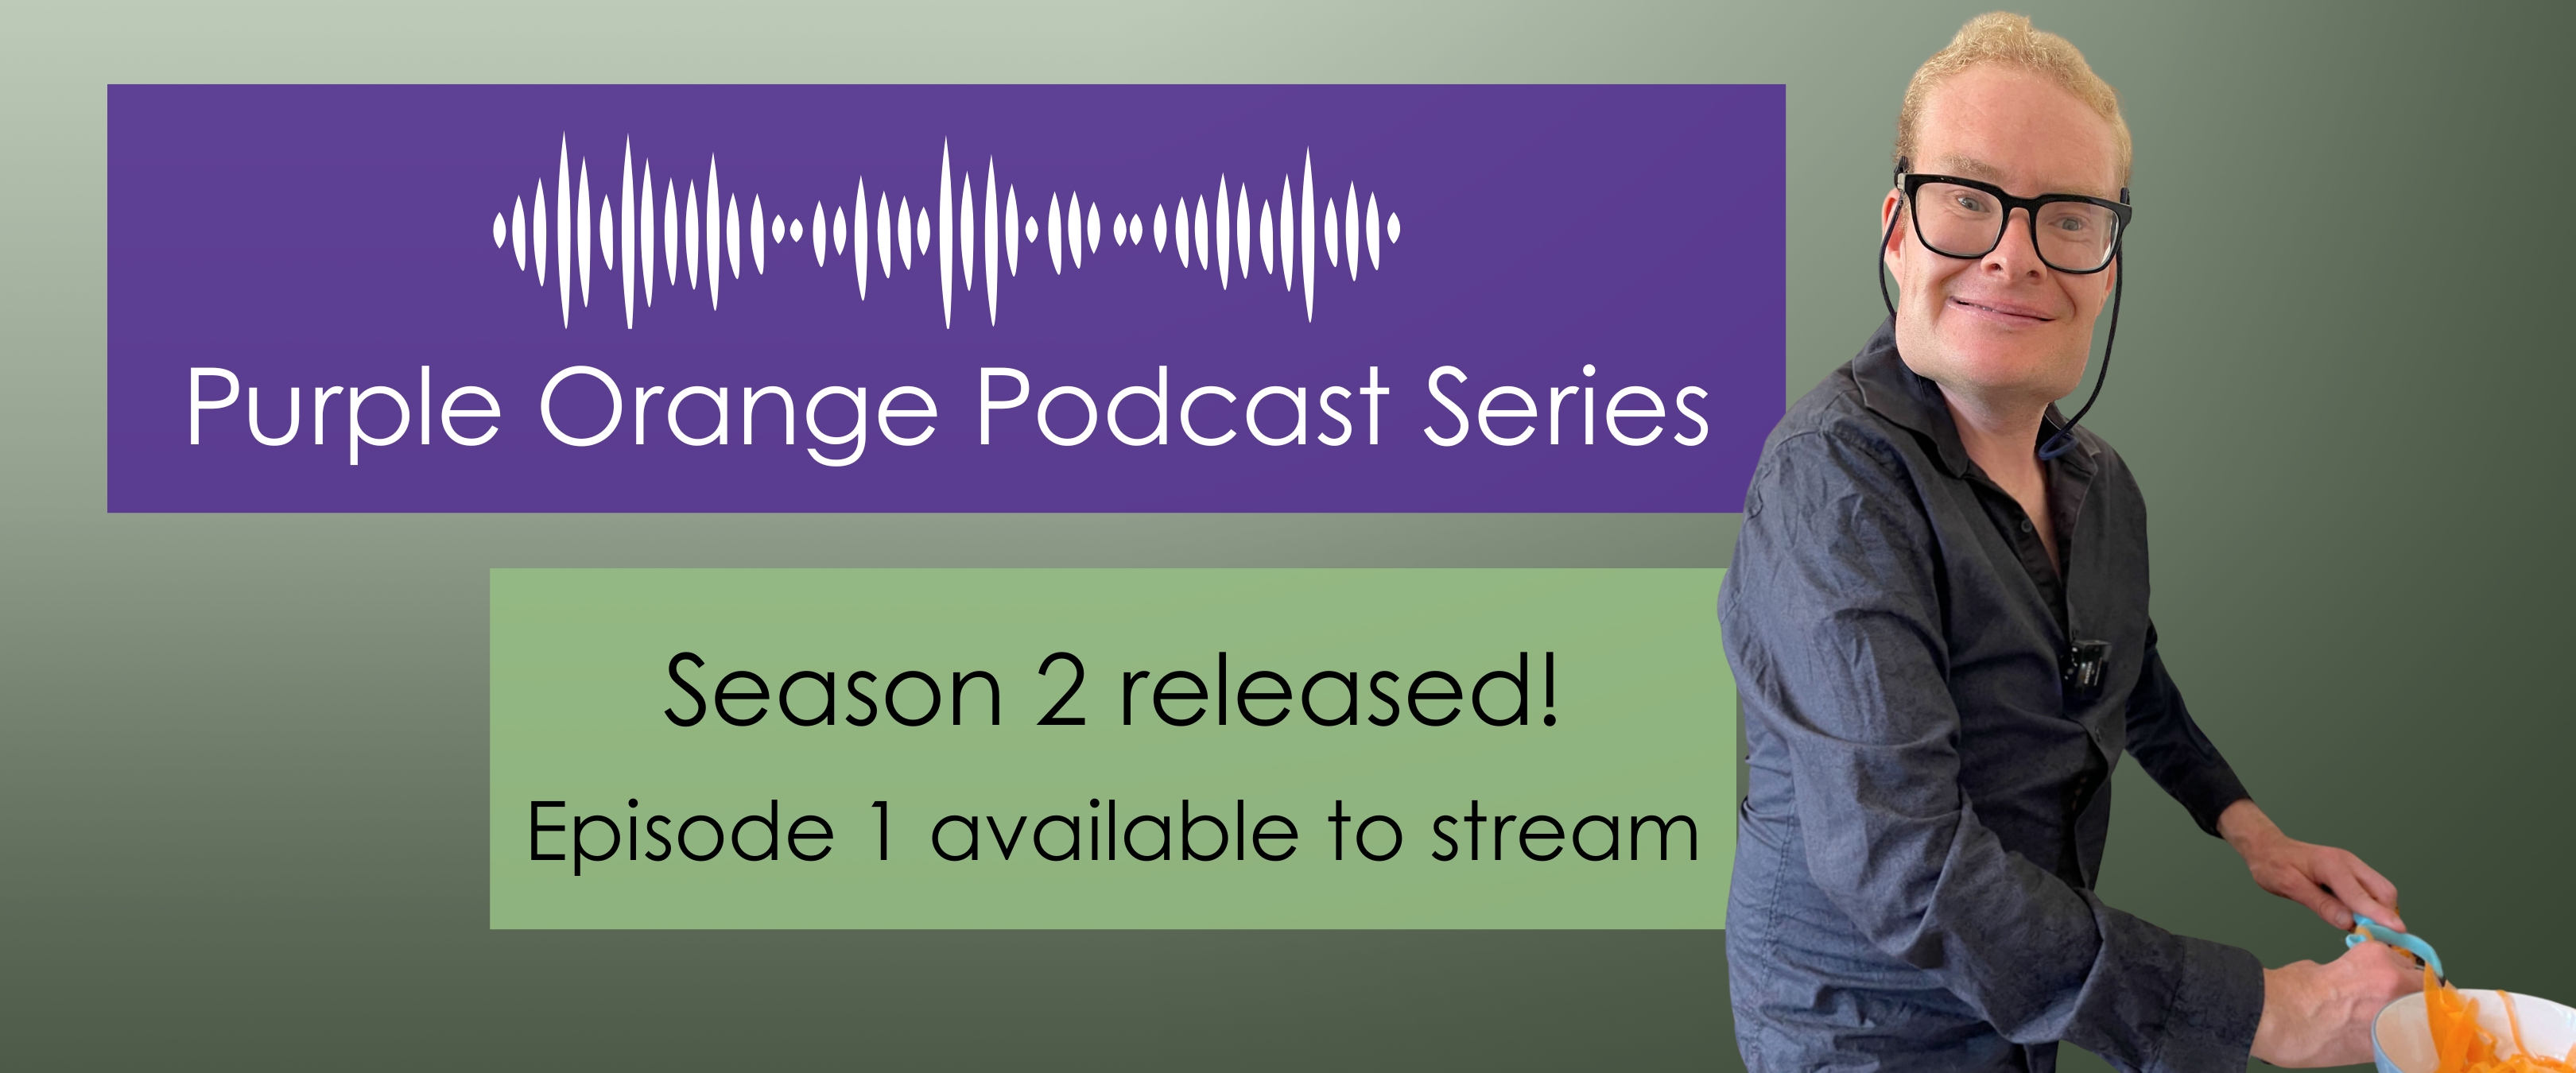 Dusty purple background with dark purple box containing white visual of audio and the words "Purple Orange Podcast Series" underneath. A photo of Esther, a woman of colour, sitting in her motorised wheelchair. Light purple box says "Episode 4 released!"